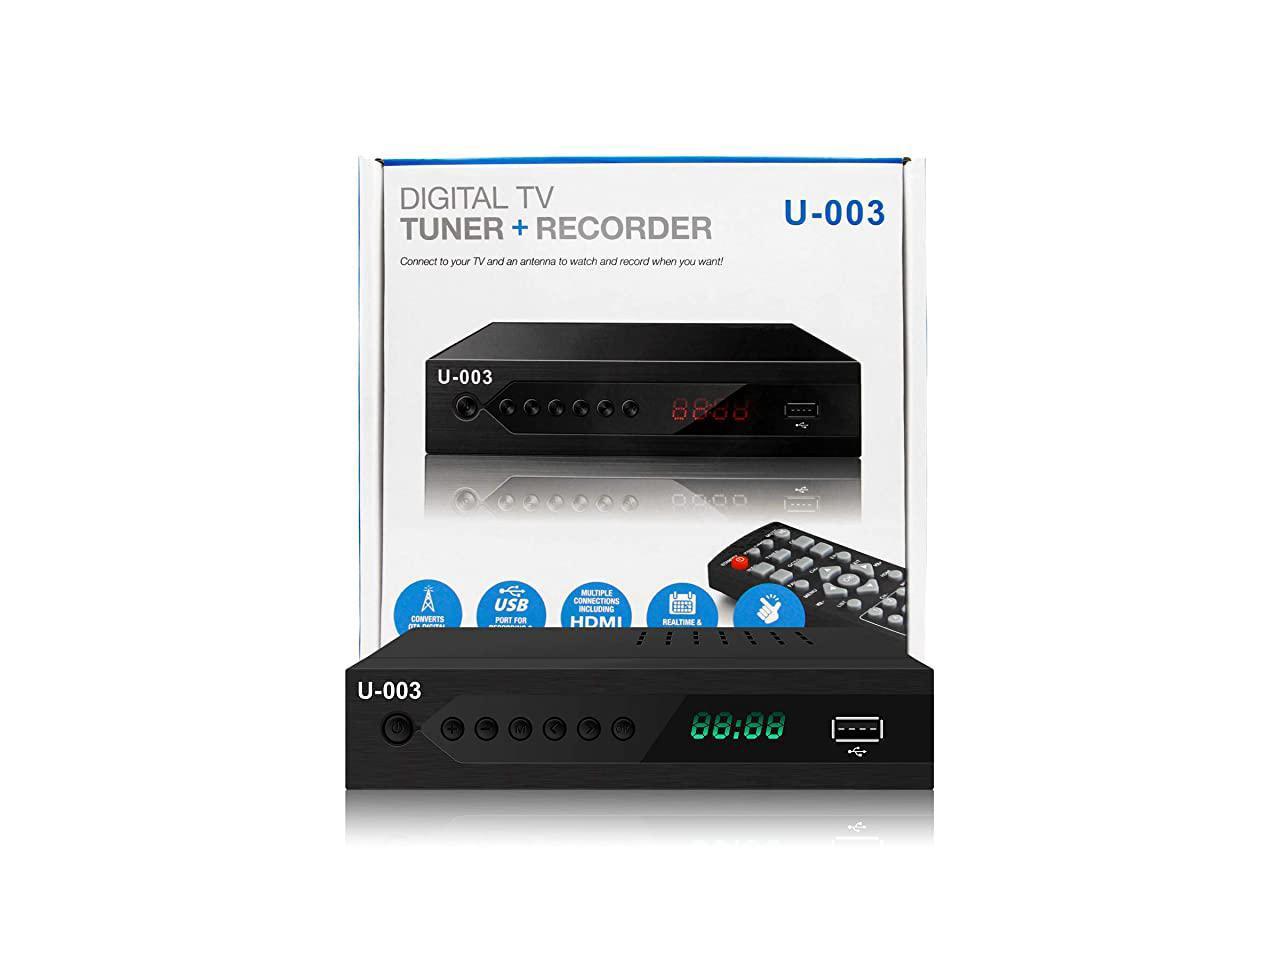 HDTV Set Top Box for HD 1080P ATSC Tuner with Record and Pause Live TV USB Multimedia Playback 2019 Update Version Digital Converter Box for Analog TV